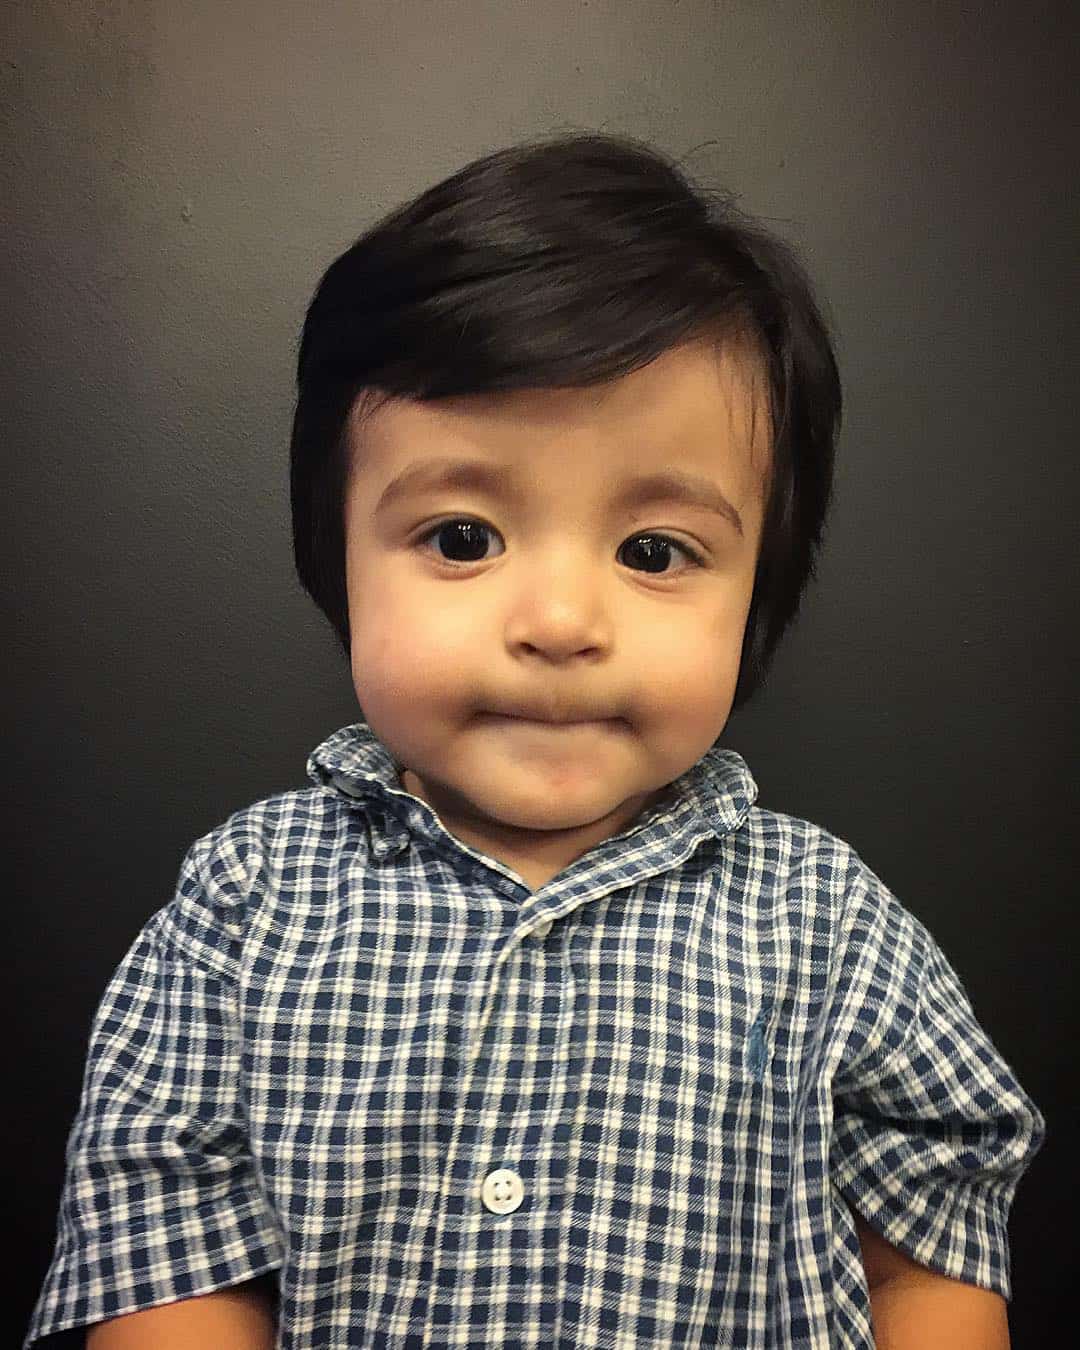 60 Cute Baby Boy Haircuts - For Your Lovely Toddler (2021)